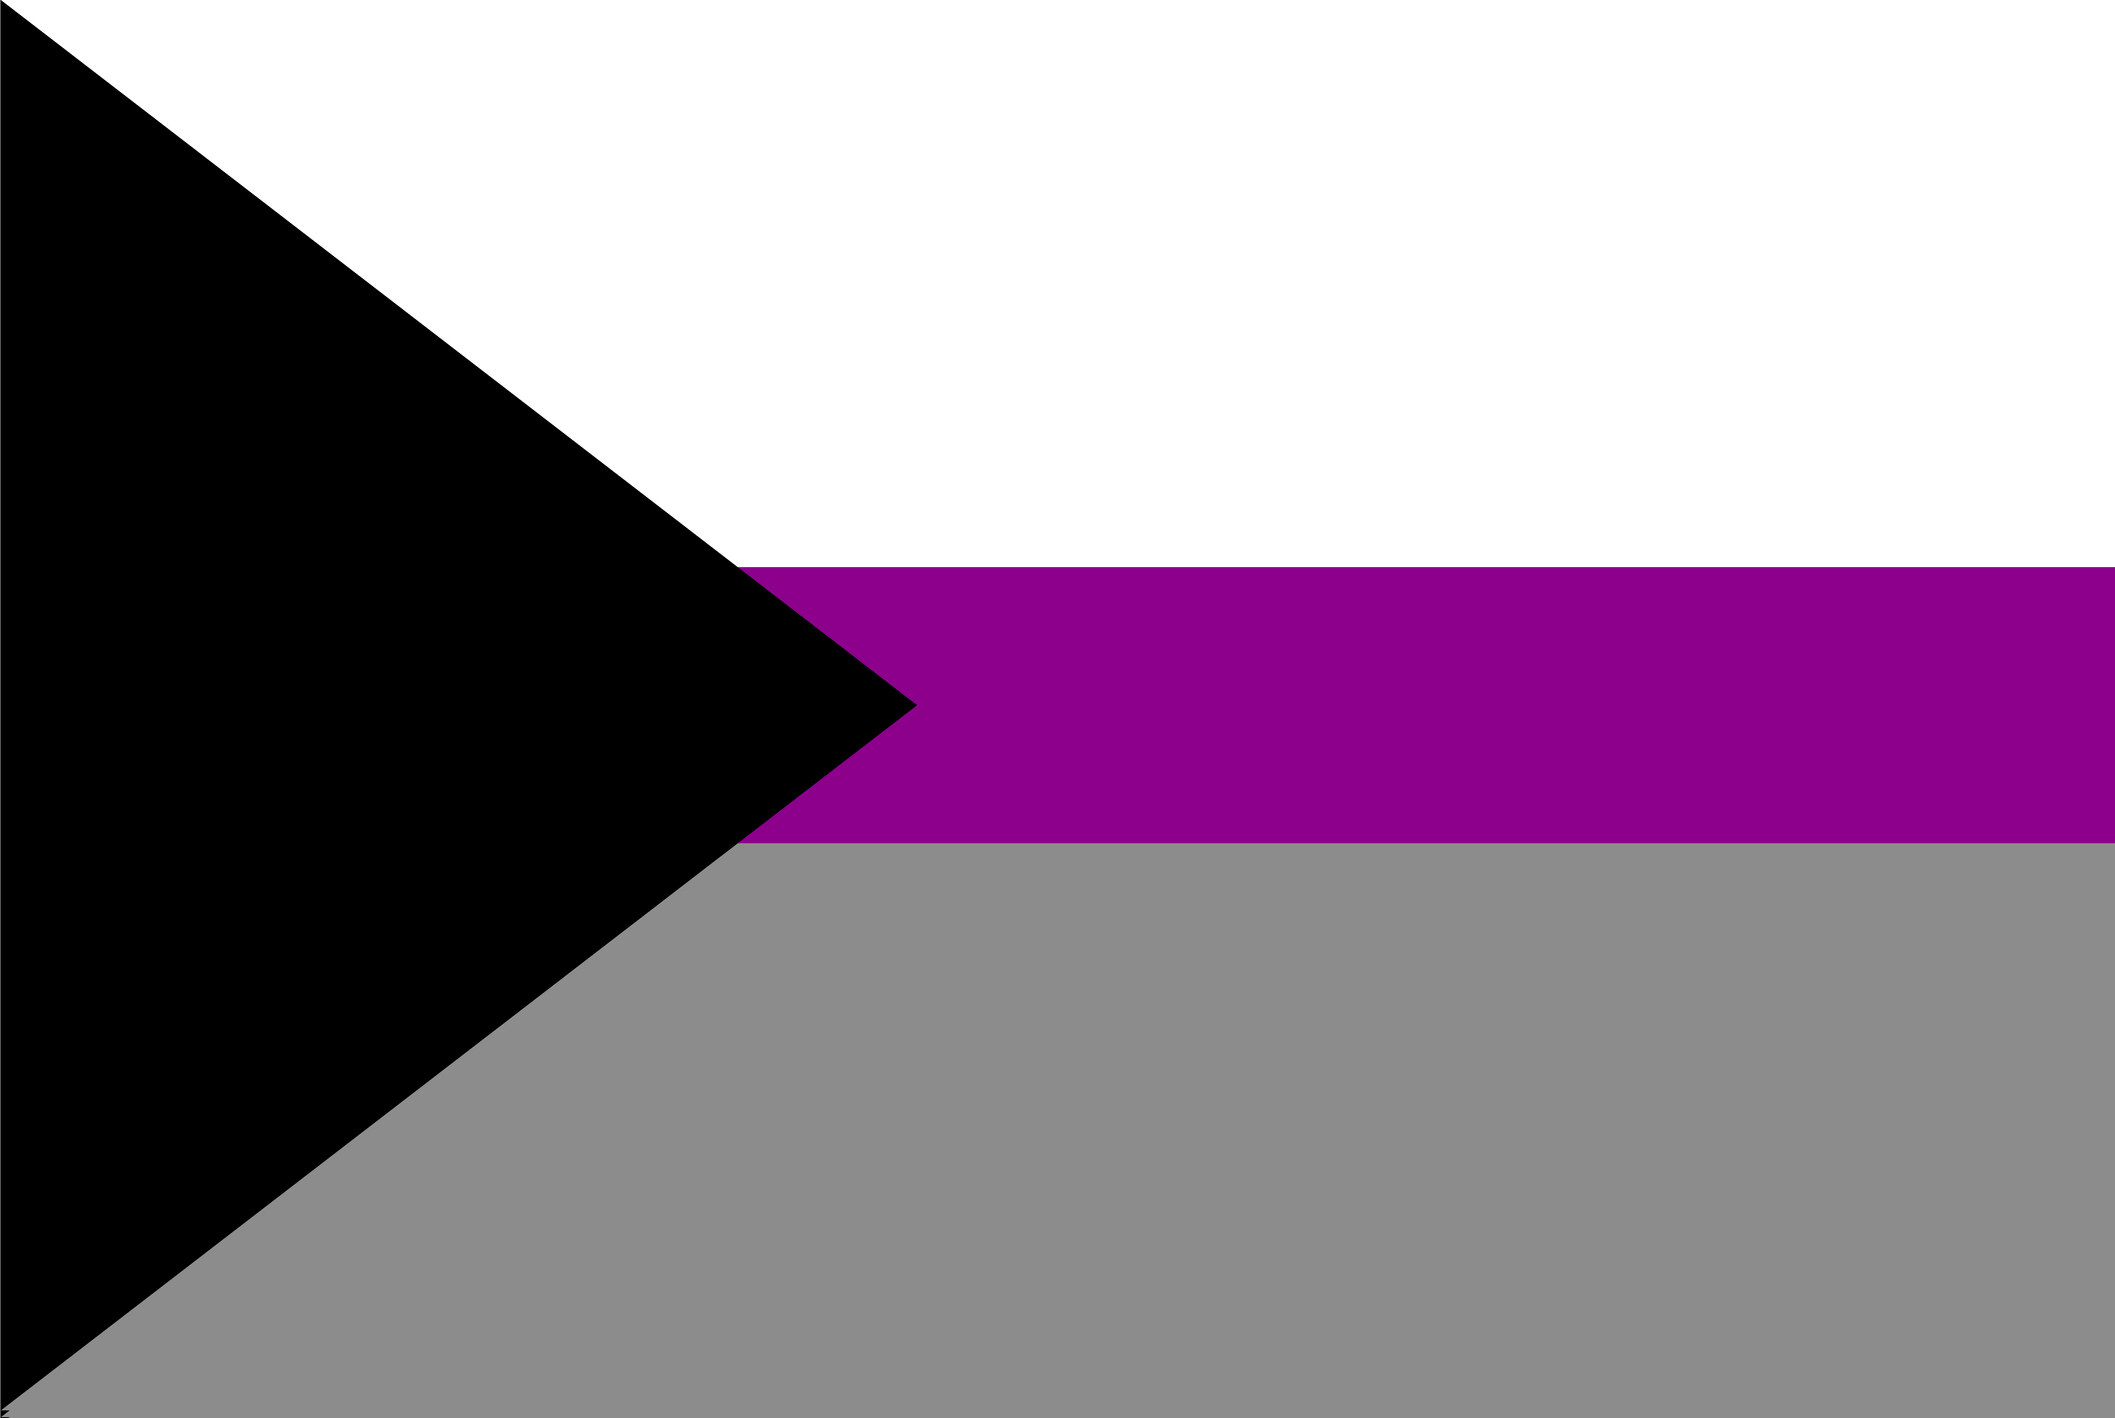 a black triangle pointing right over white purple and grey stripes